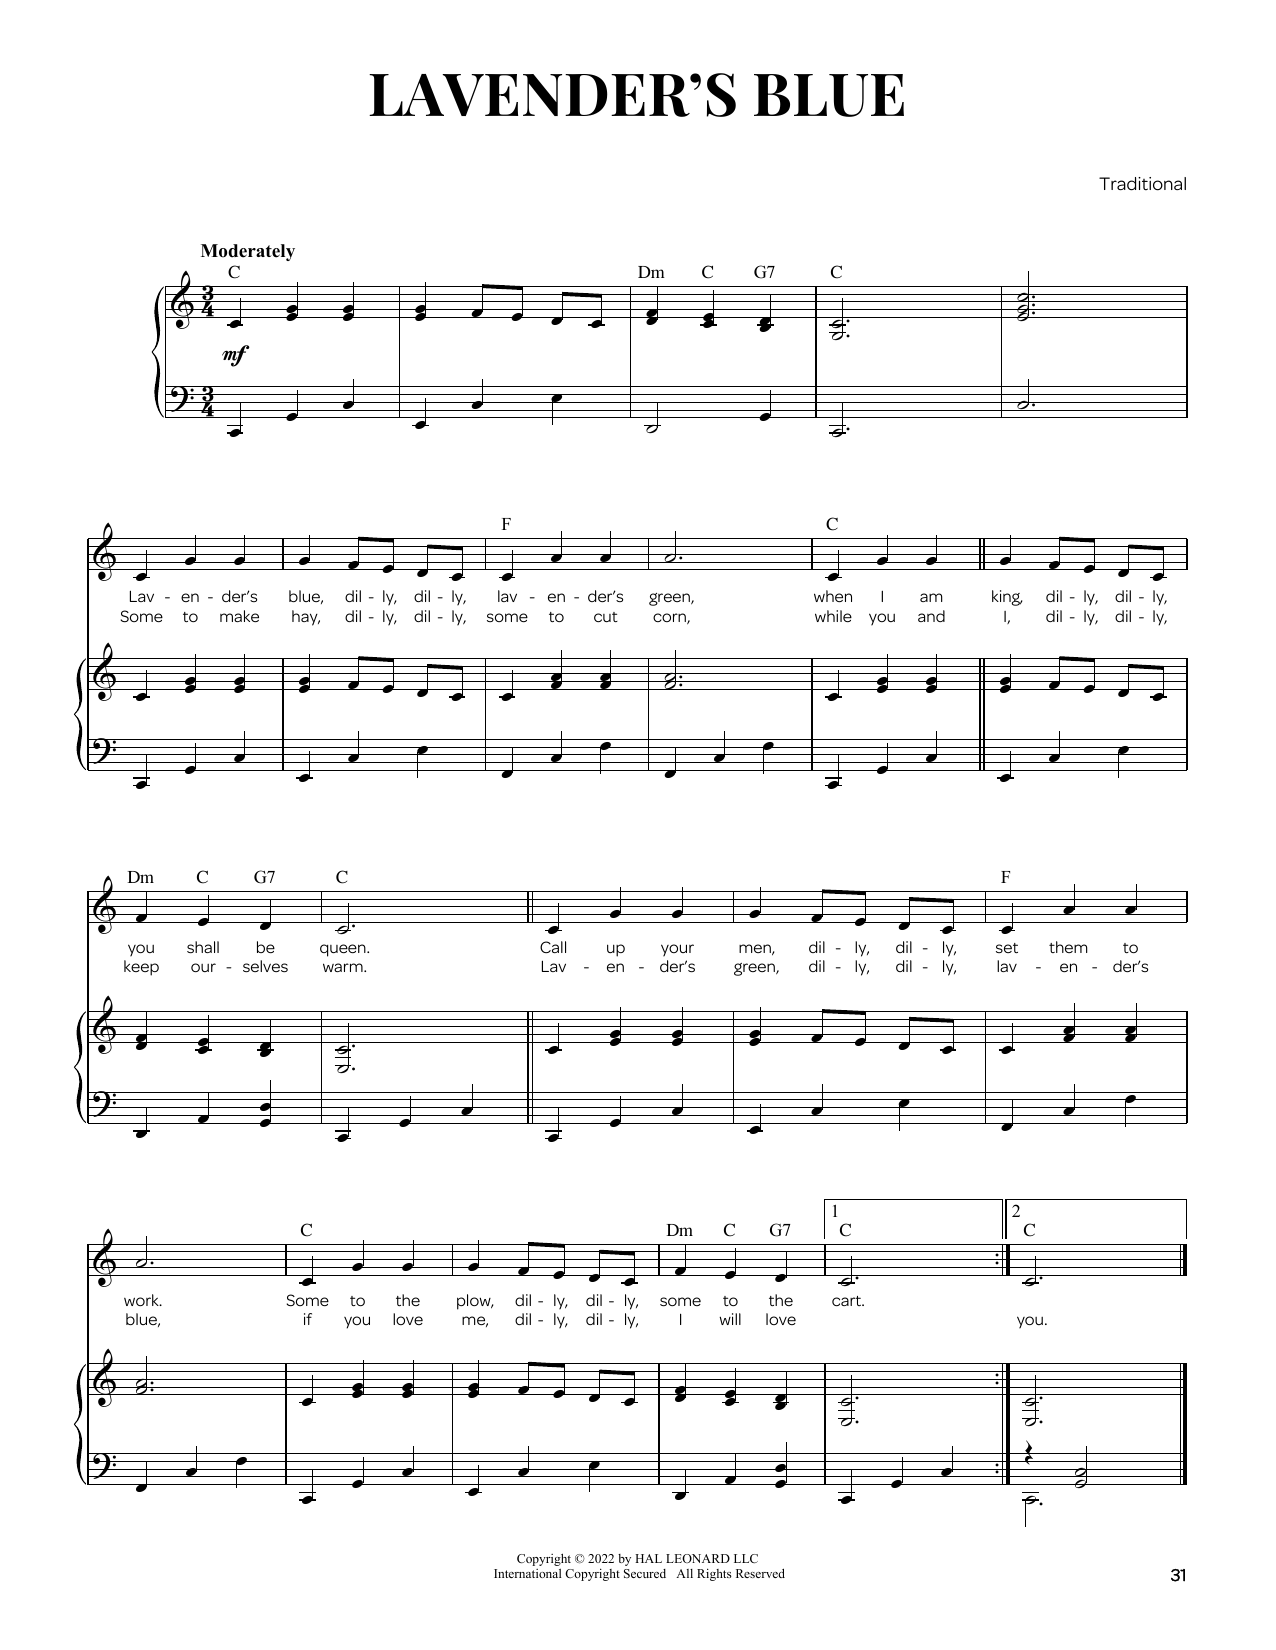 Download Traditional Lavender's Blue Sheet Music